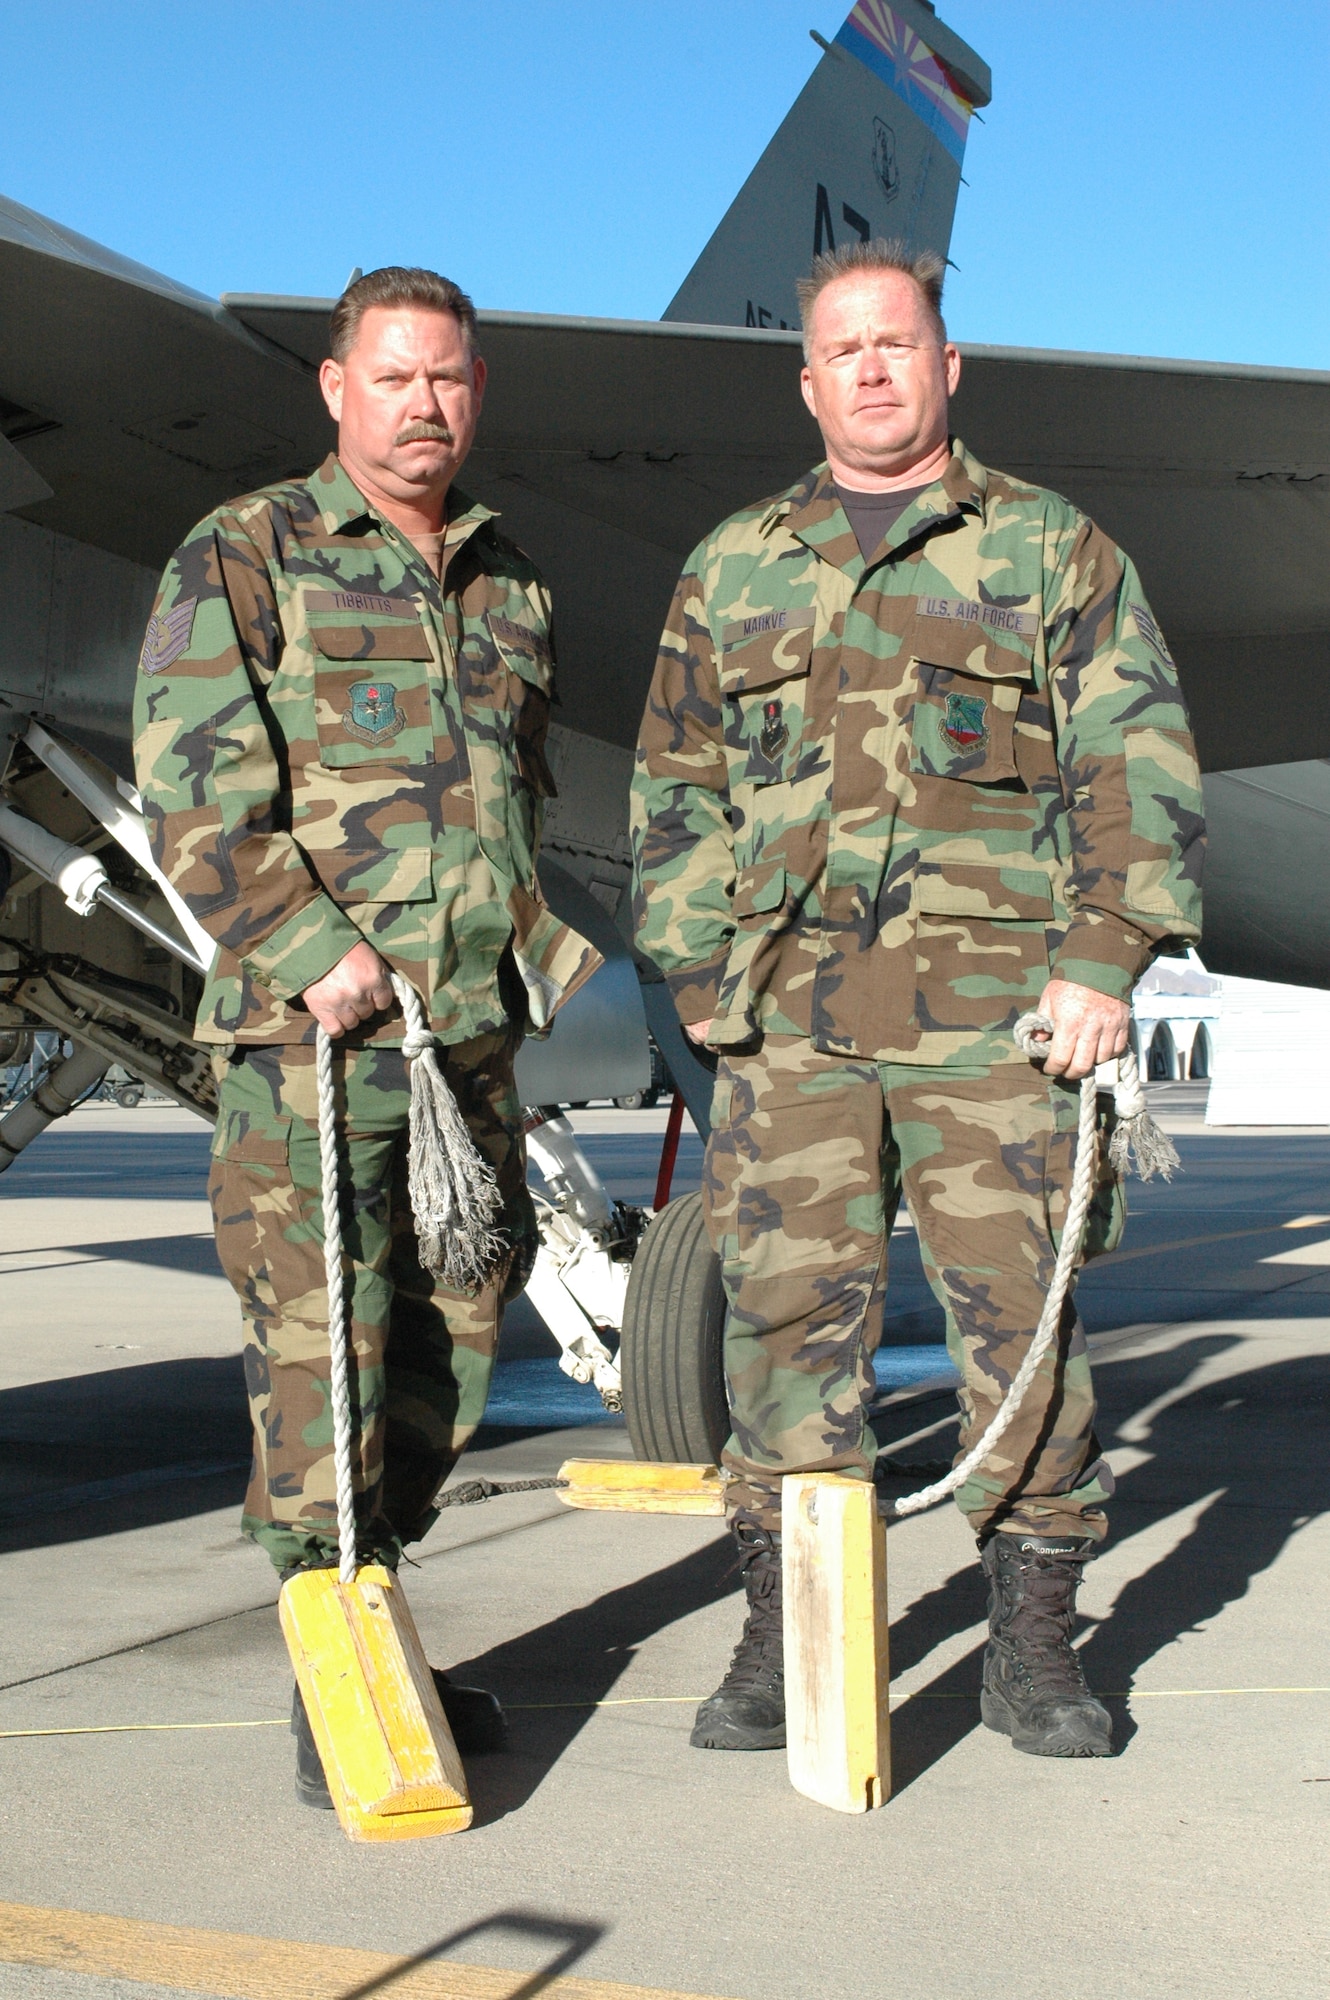 Tech Sgt. Daniel Tibbitts (left), Staff Sgt. Michael Markve (right) and Tech. Sgt. Jaime Aviles (not pictured) earned the Air Force and Air Education and Training Command Safety Well Done Awards for saving this F-16 from a mishap last year. The three crew chiefs, assigned to the Arizona Air National Guard's 162nd Fighter Wing, used chocks to stop the aircraft when loss of hydraulic pressure in the braking system caused it to meander uncontrollably on the flightline here. (Air National Guard photo by Staff Sgt. Desiree Twombly)